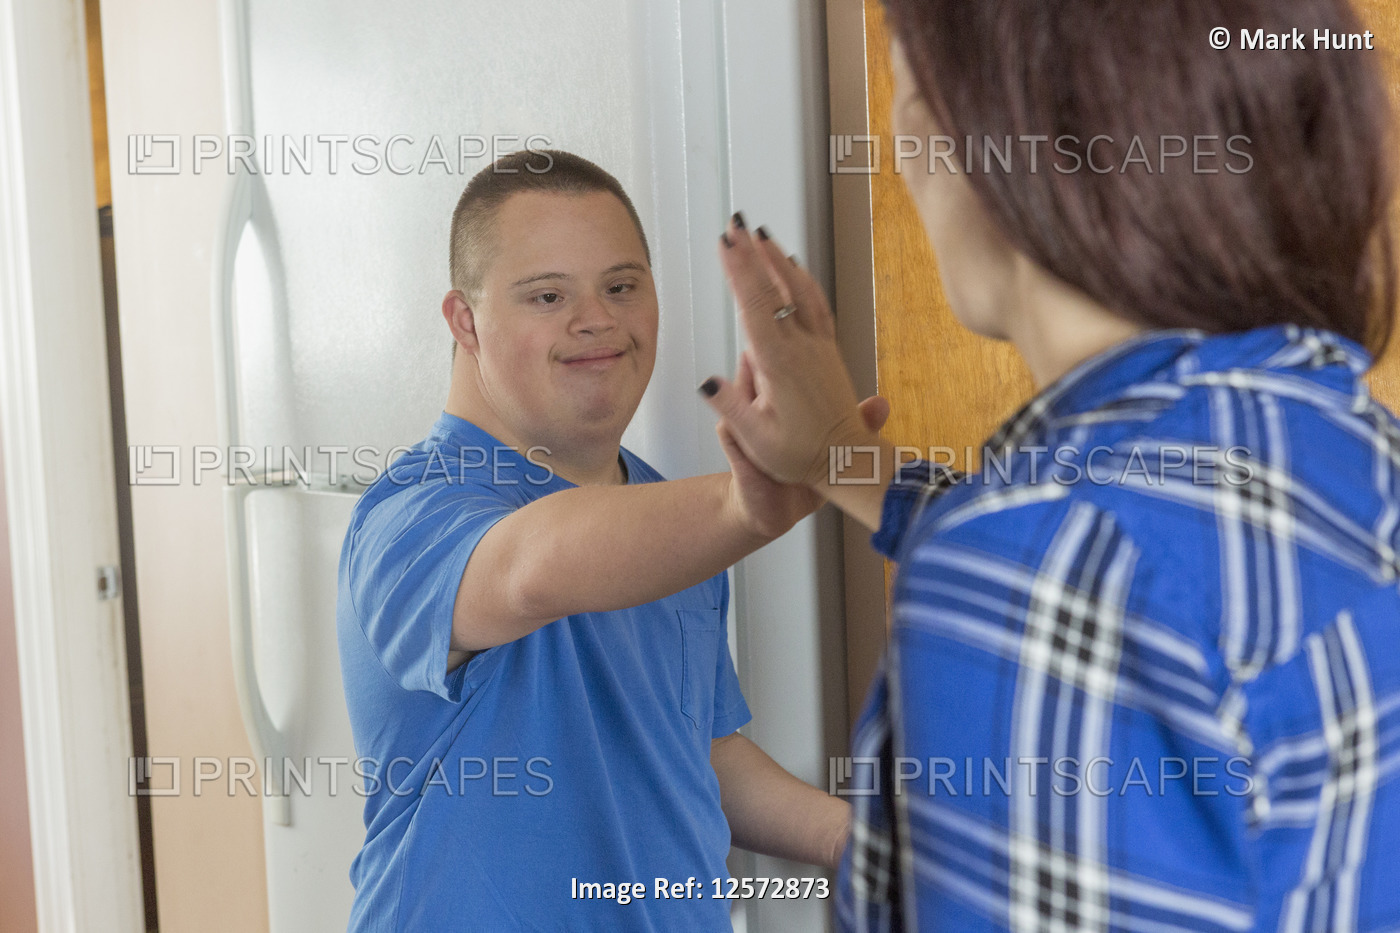 Teen boy who has Down Syndrome standing with his friend